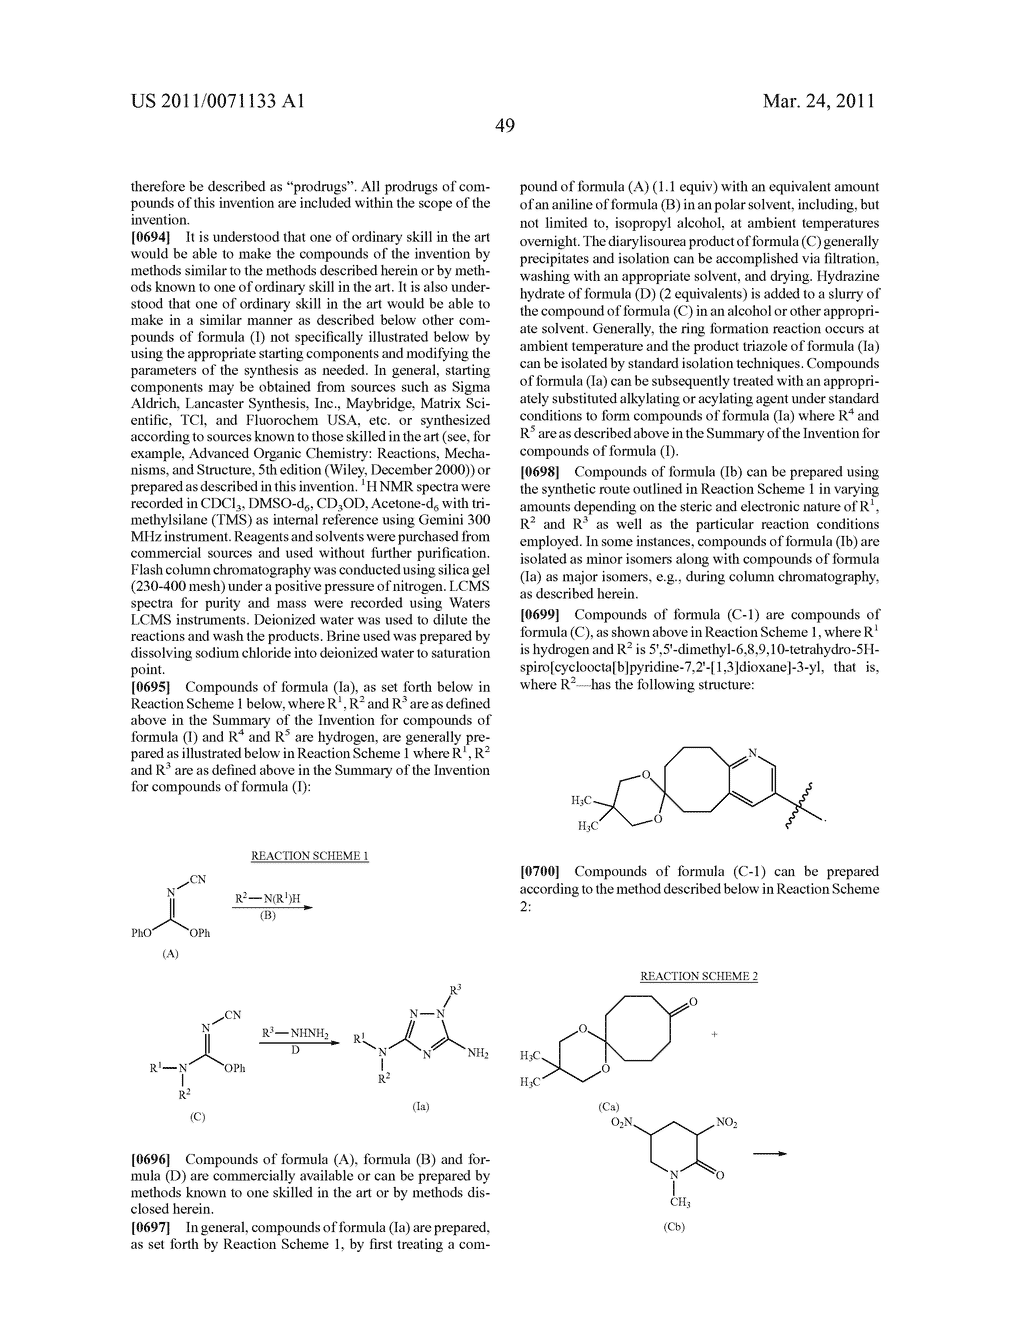 BICYCLIC ARYL AND BICYCLIC HETEROARYL SUBSTITUTED TRIAZOLES USEFUL AS AXL INHIBITORS - diagram, schematic, and image 50